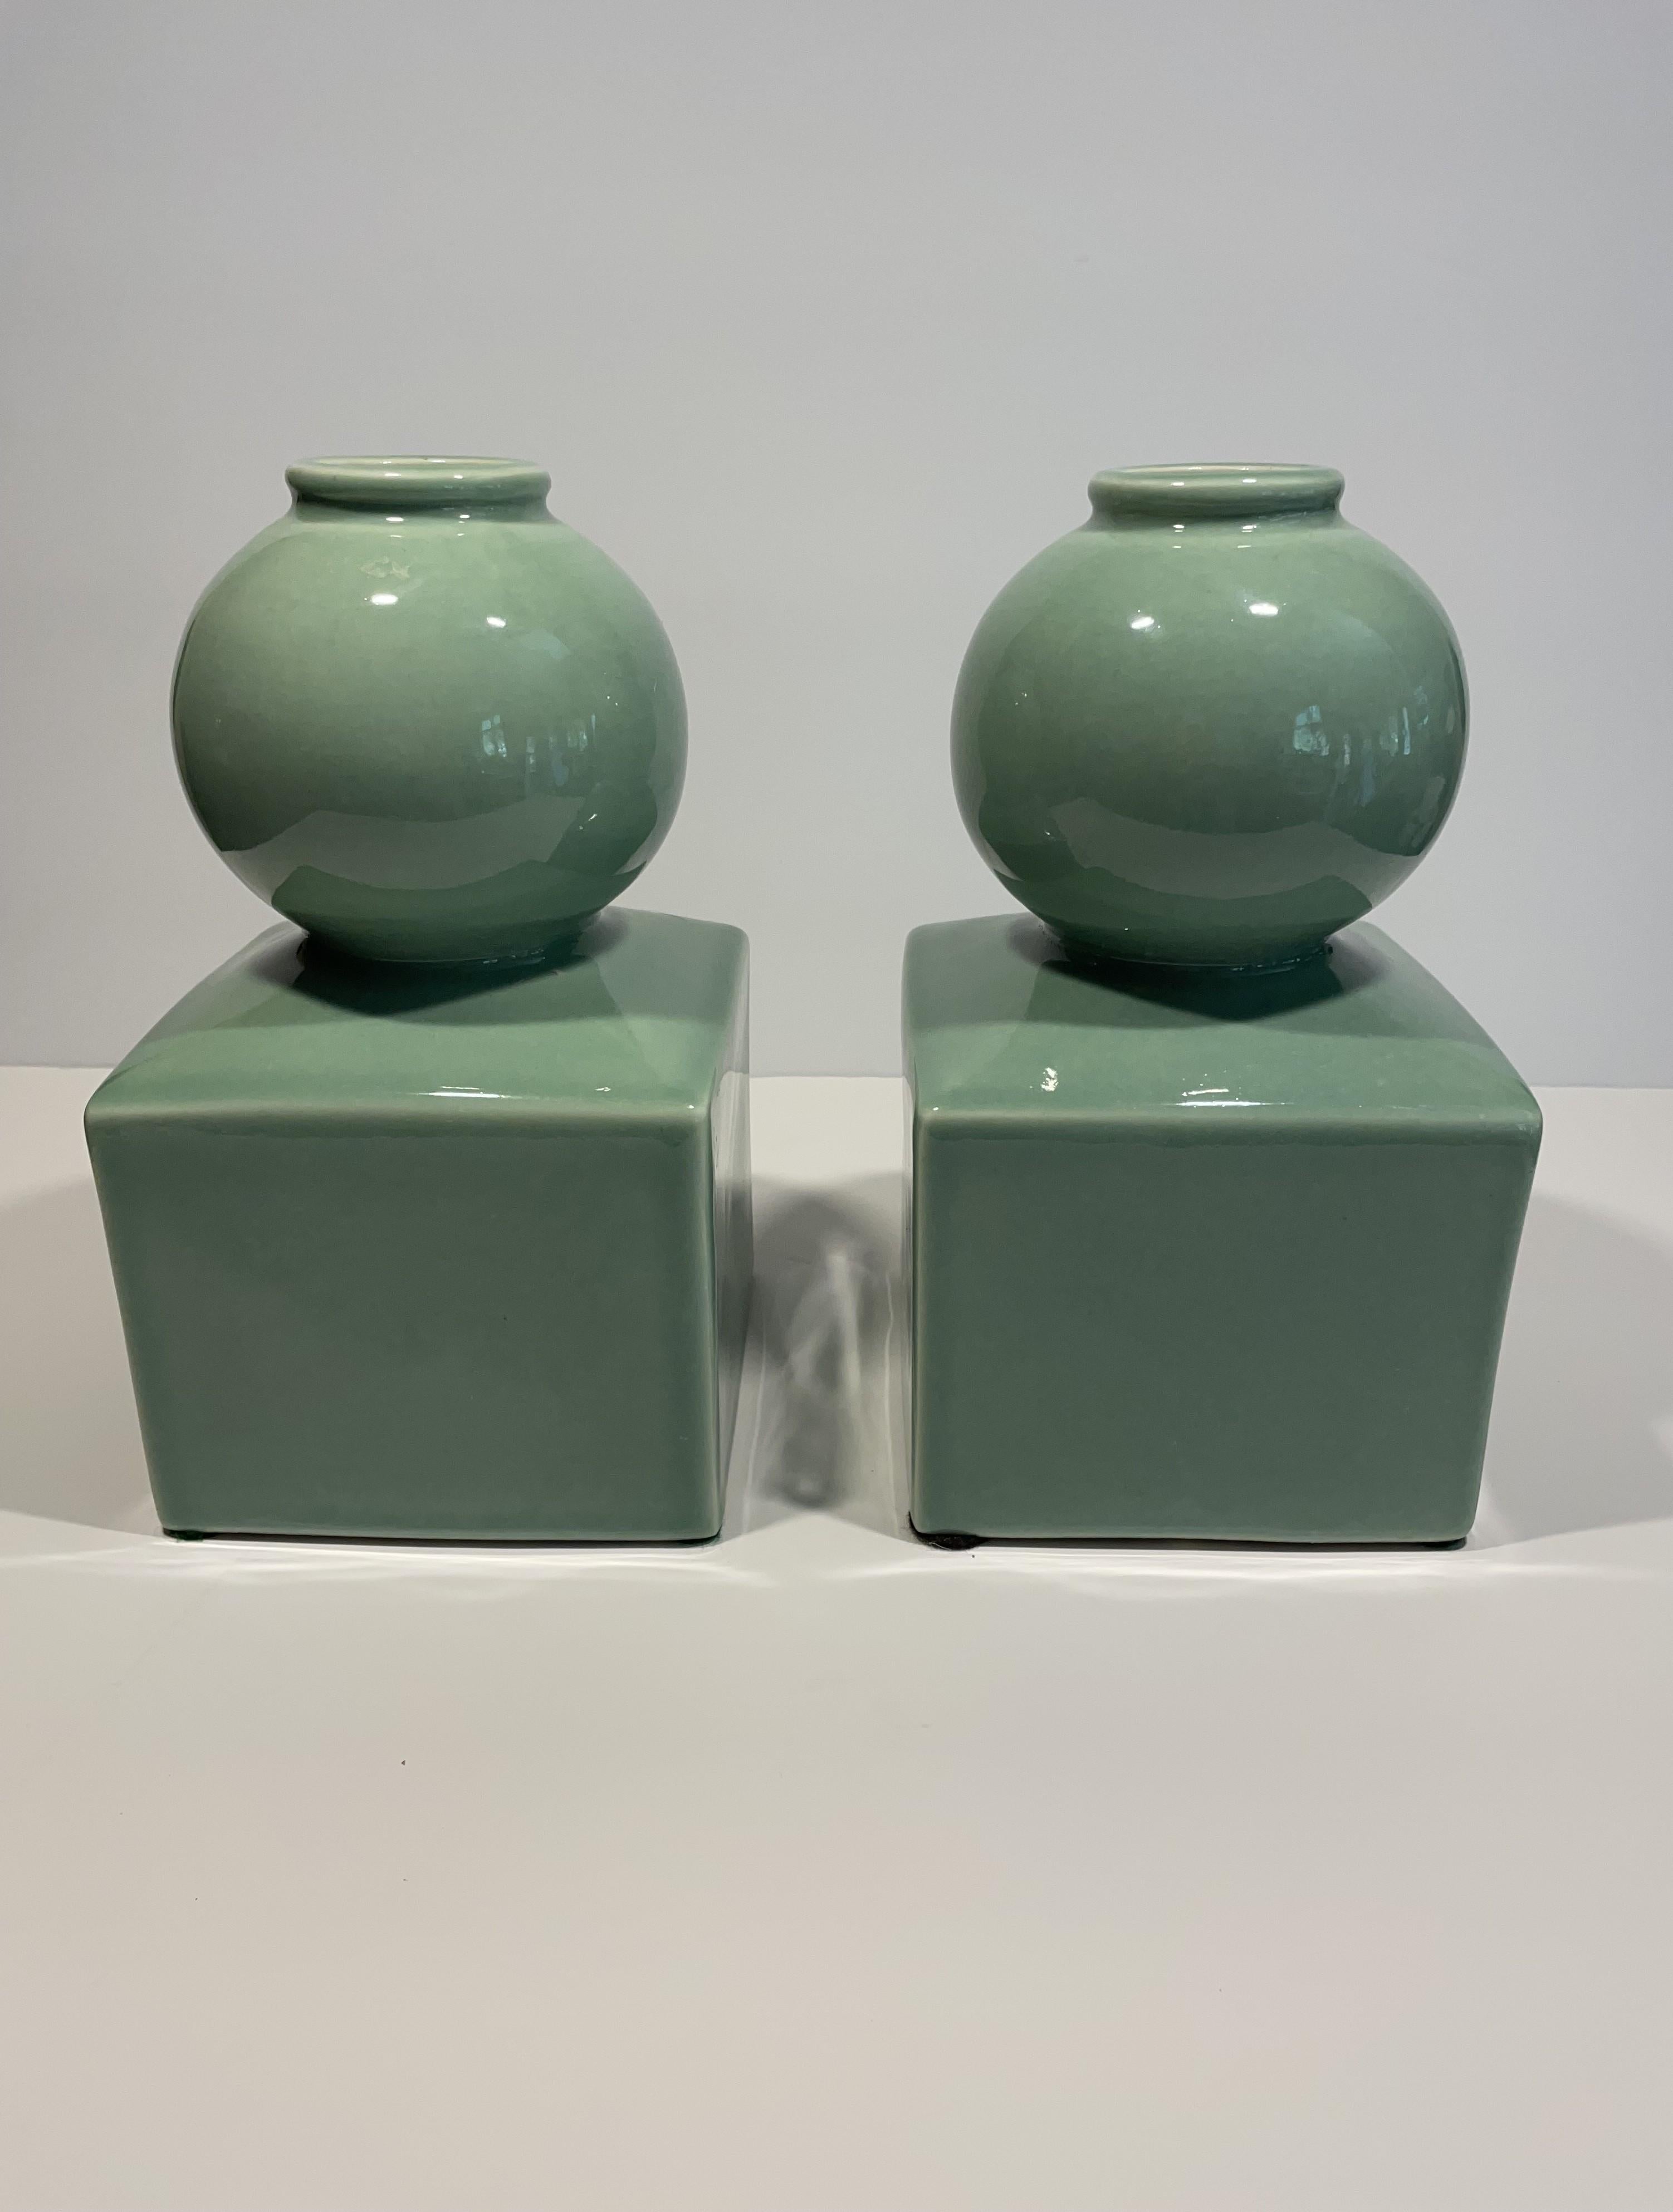 Celadon Ceramic Vases or Bookends Attributed to Serena & Lily -- A Pair For Sale 2